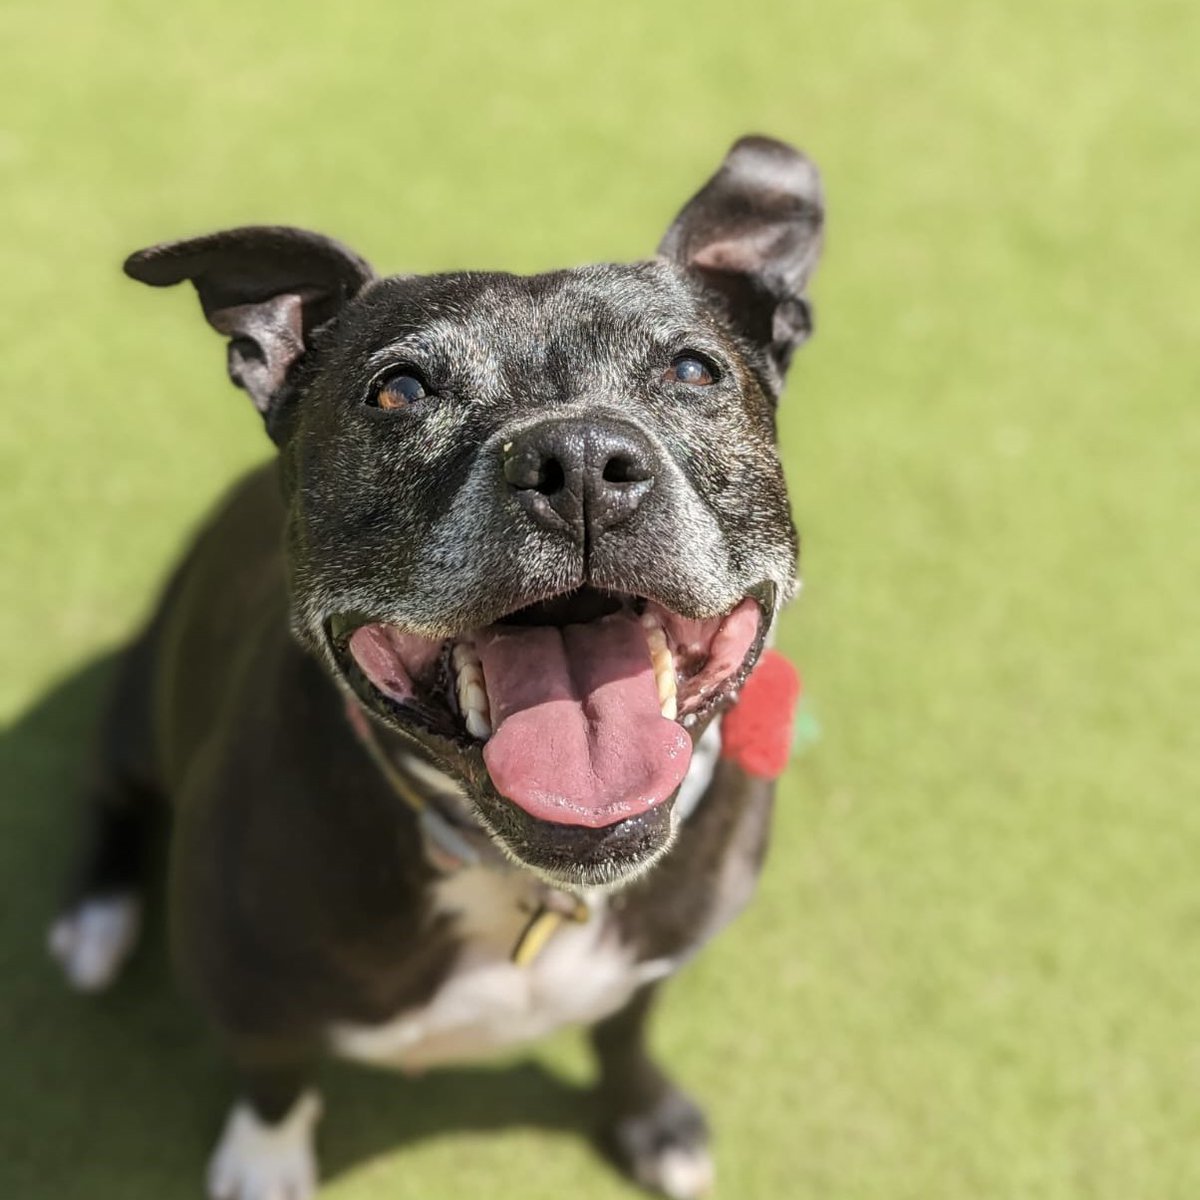 #Sunshine and Cheeka’s beautiful face…. the perfect way to start the week! 😍☀️🐶

Meet her👉 dogstrust.org.uk/rehoming/dogs/…

#adoptdontshop #rehome #ineedahome #staffy #staffysmile #mondaymotivation @DogsTrust